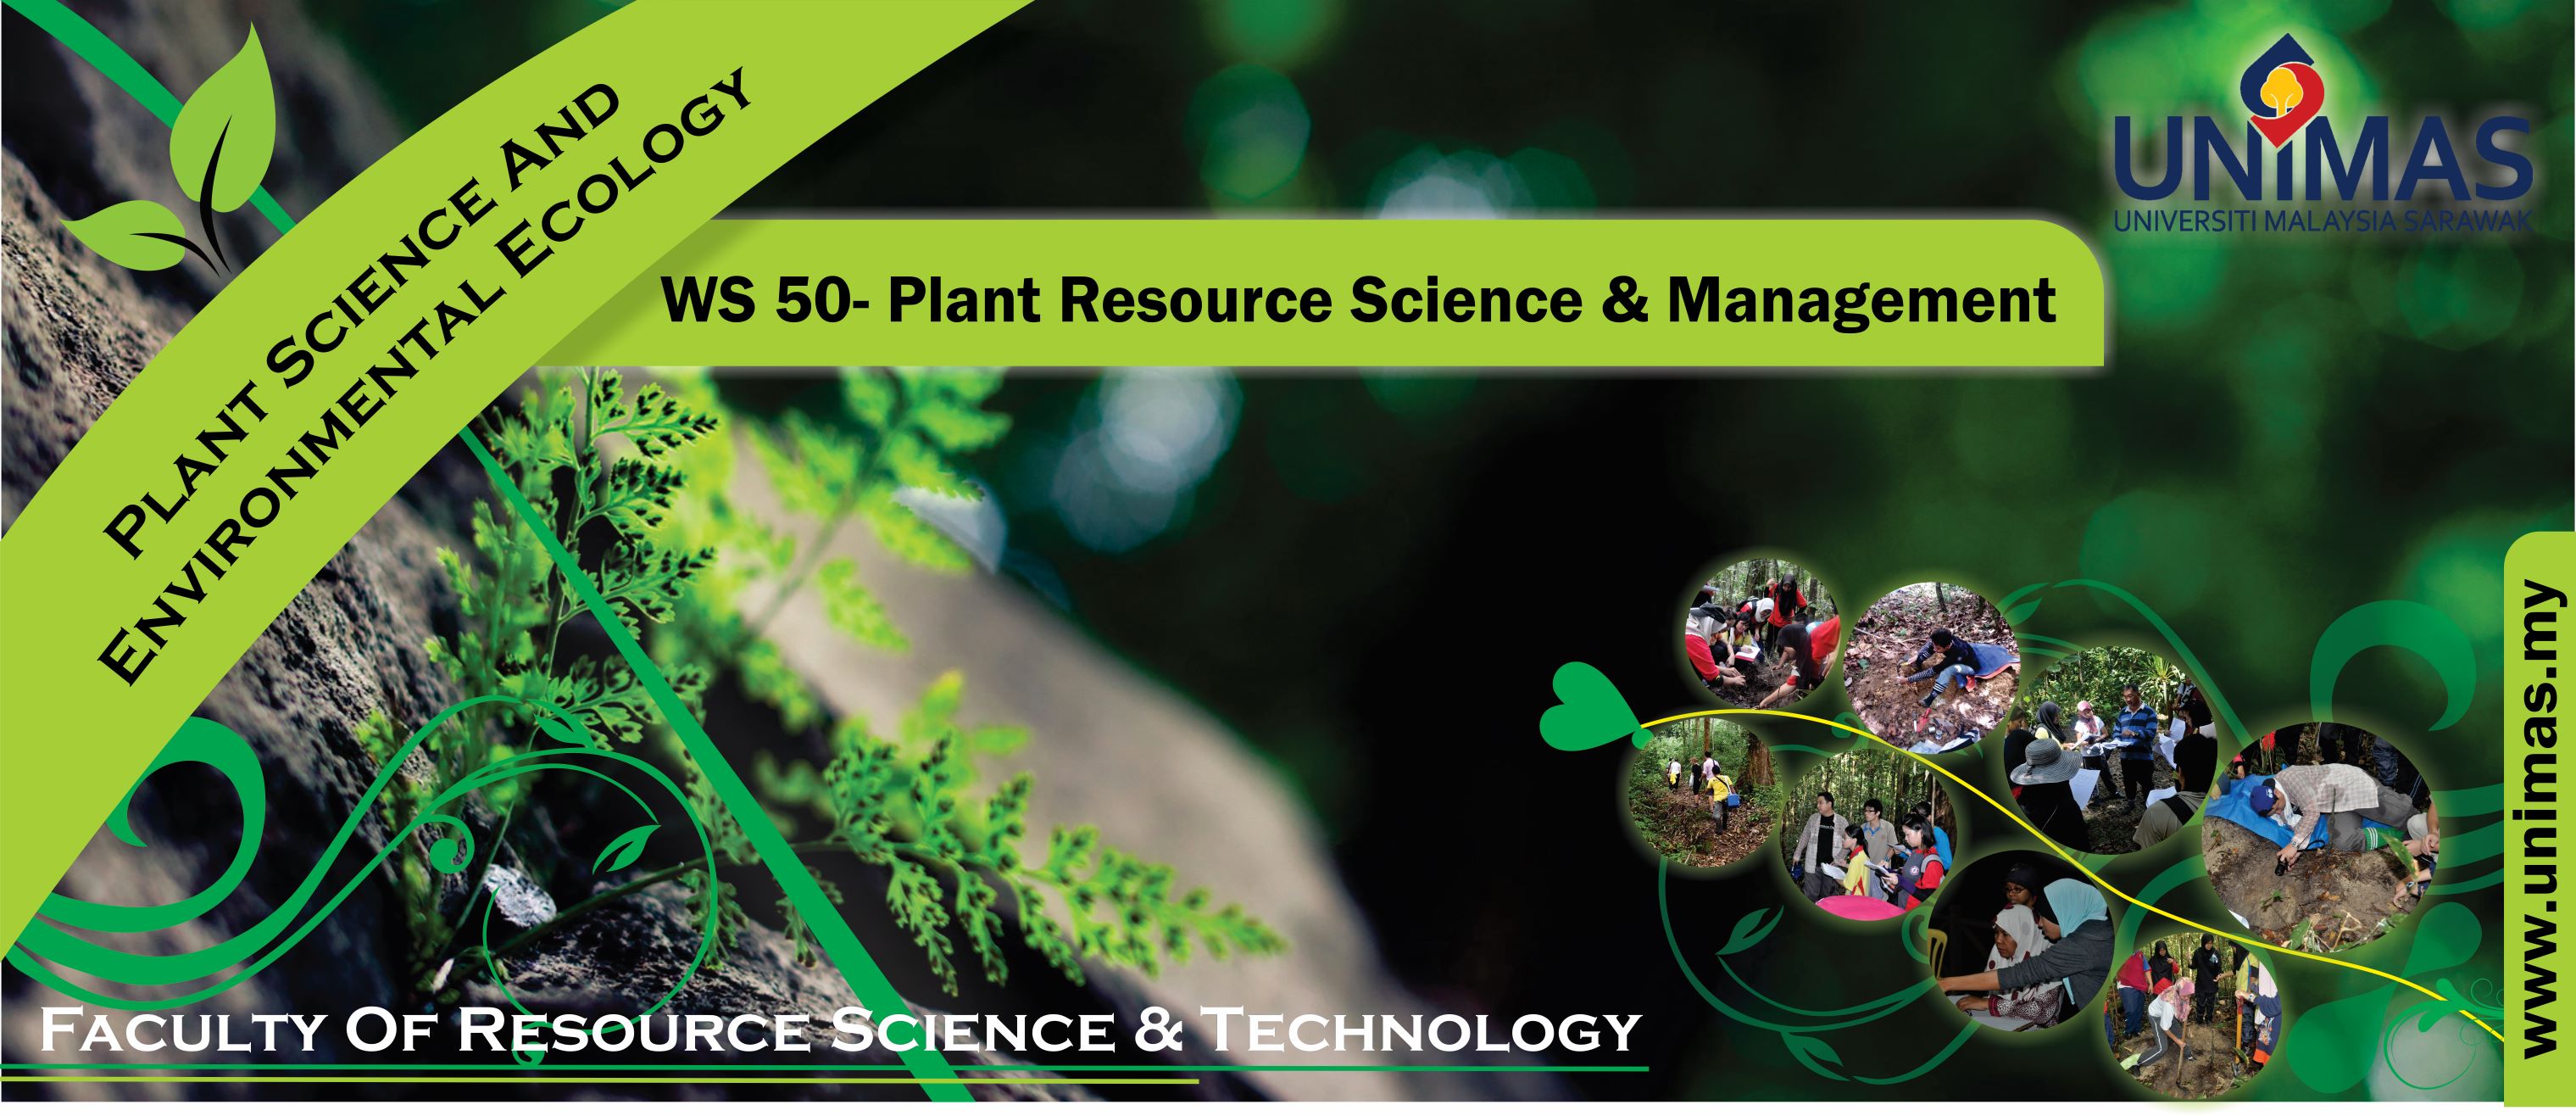 WS50 Bachelor of Science with Honours (Plant Resource Science and Management)